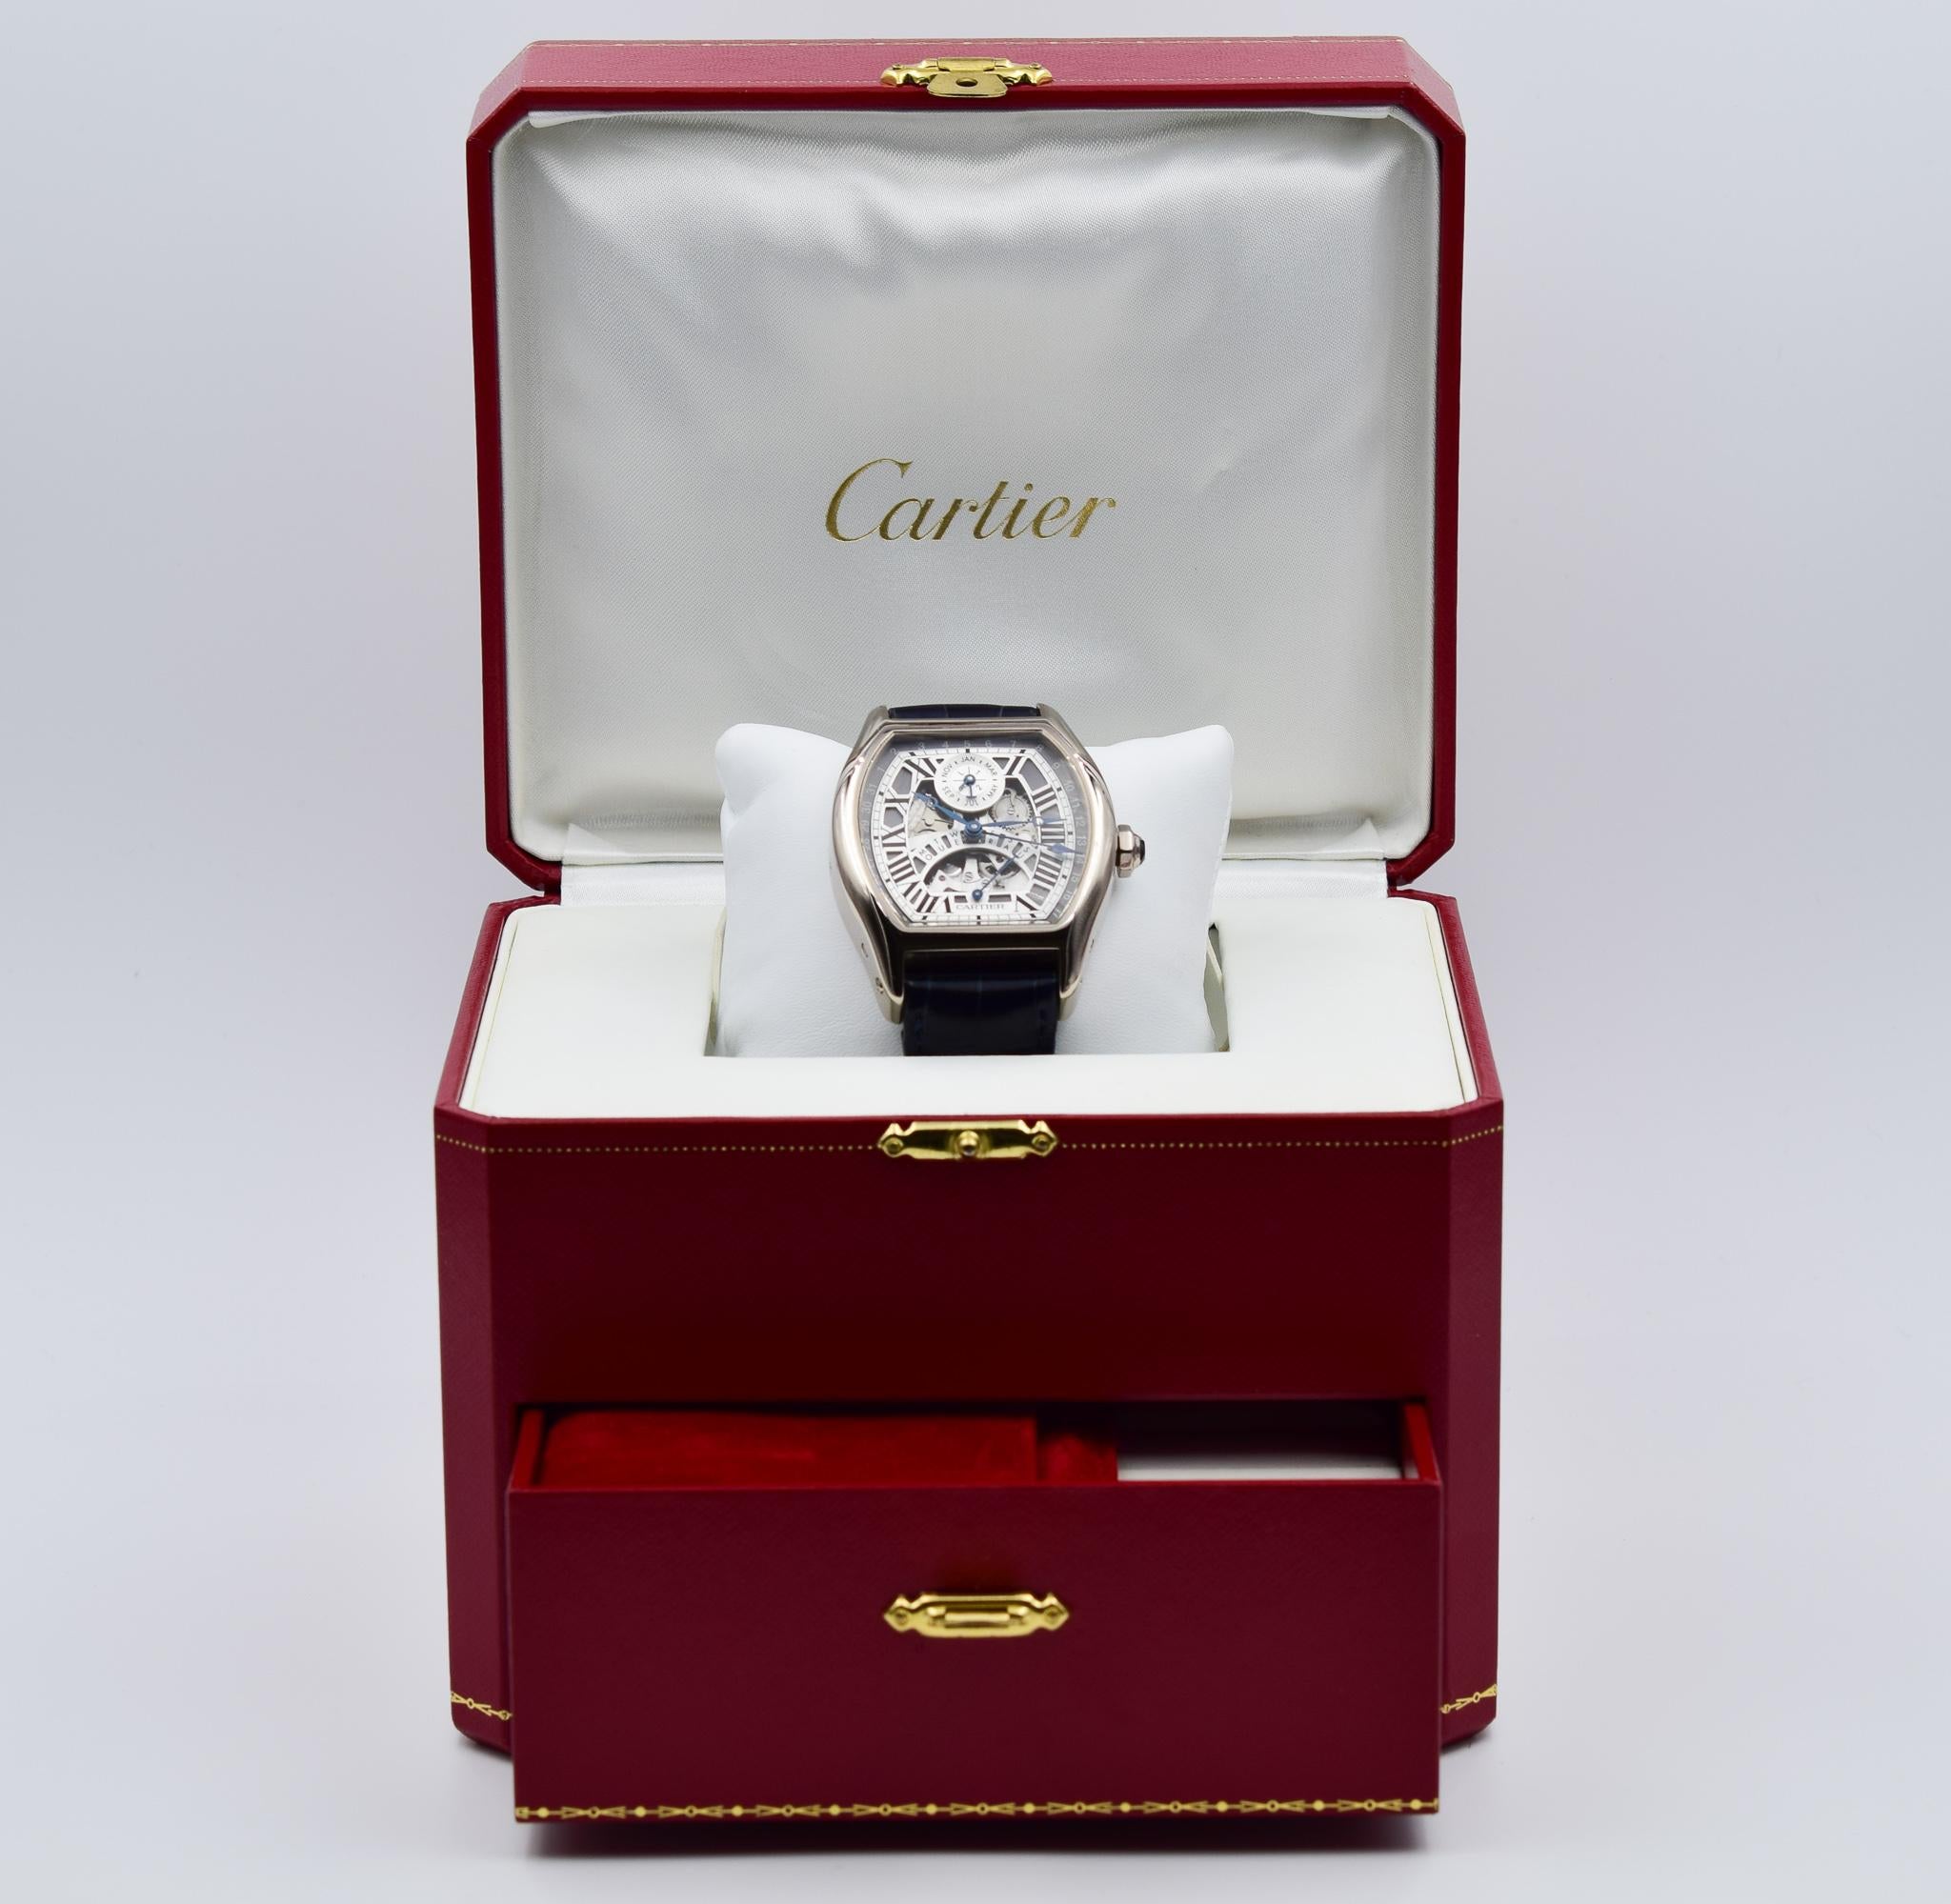 Cartier Tortue Perpetual Calendar in 18k White Gold W1580004, Full Box / Papers 4